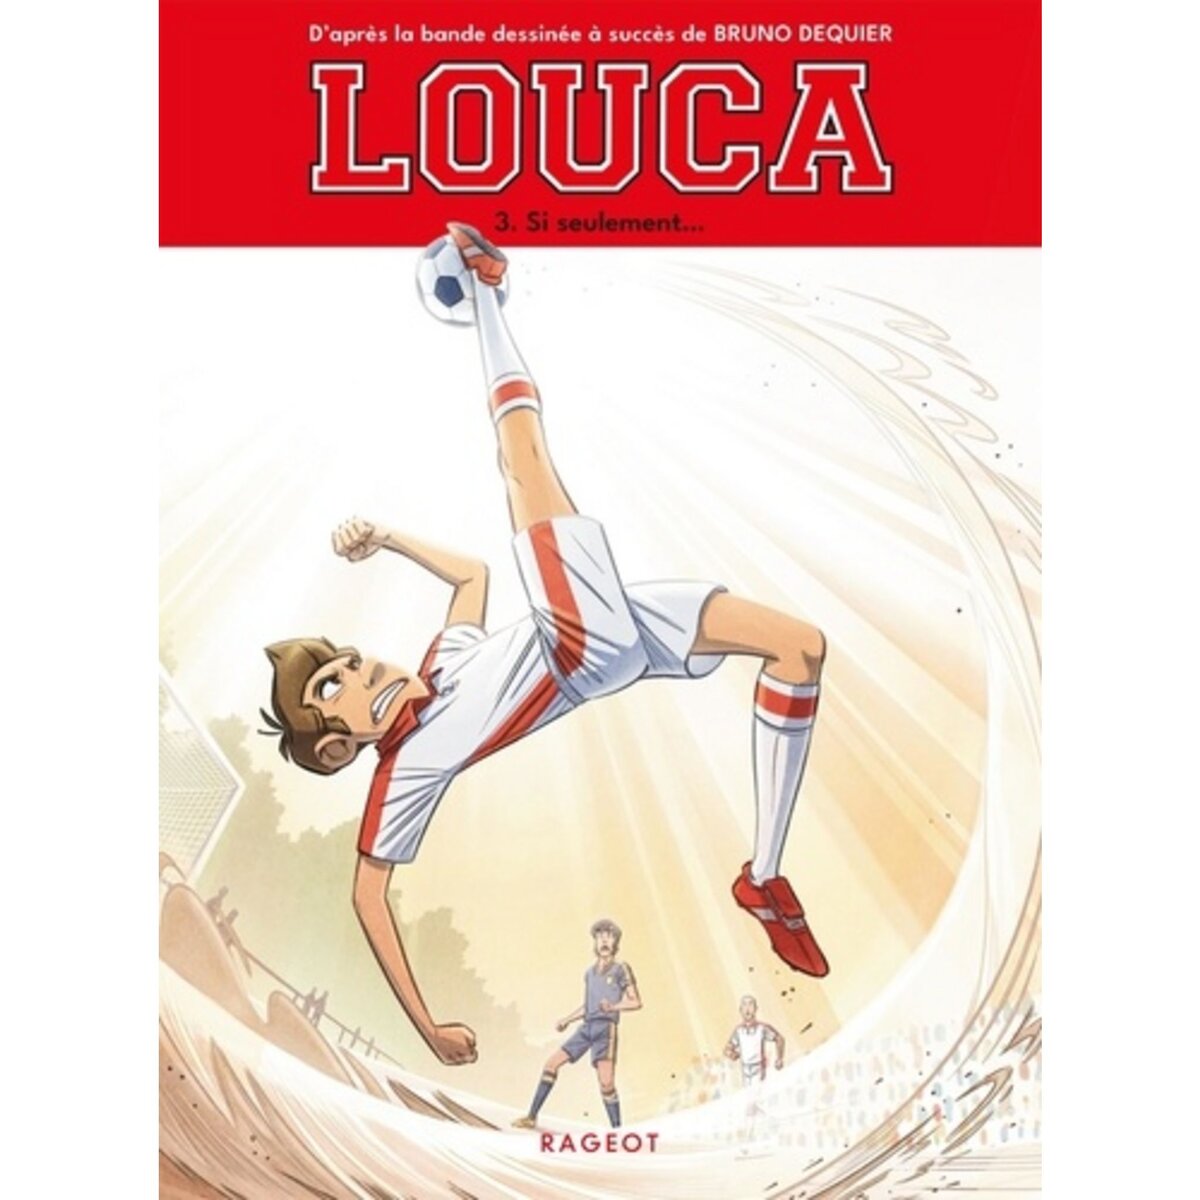  LOUCA TOME 3 : SI SEULEMENT..., Nanteuil Sophie